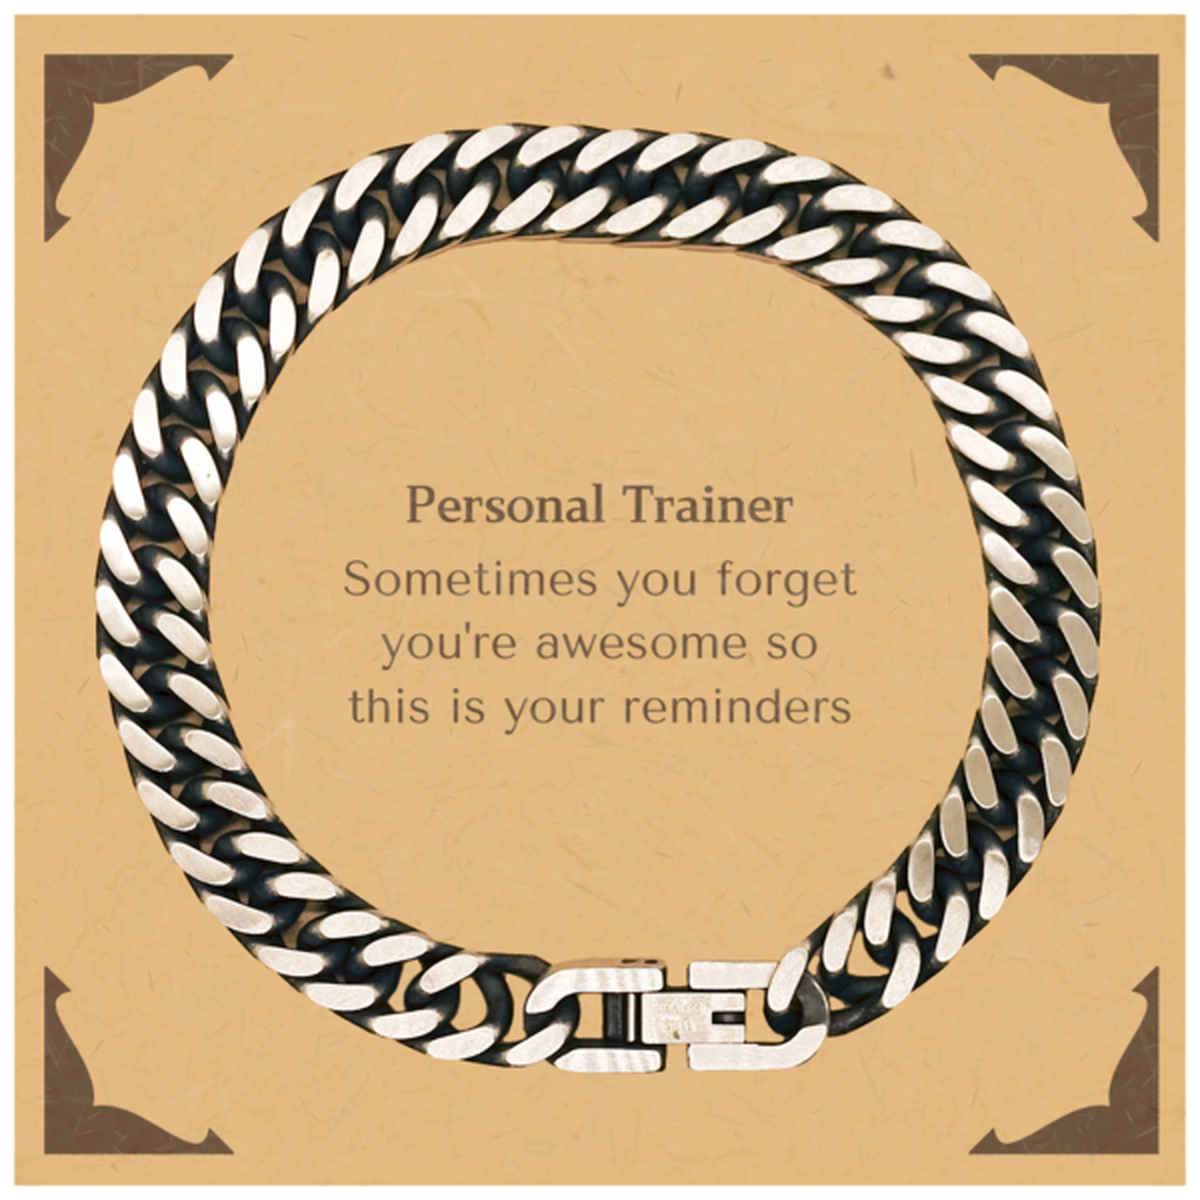 Sentimental Personal Trainer Cuban Link Chain Bracelet, Personal Trainer Sometimes you forget you're awesome so this is your reminders, Graduation Christmas Birthday Gifts for Personal Trainer, Men, Women, Coworkers